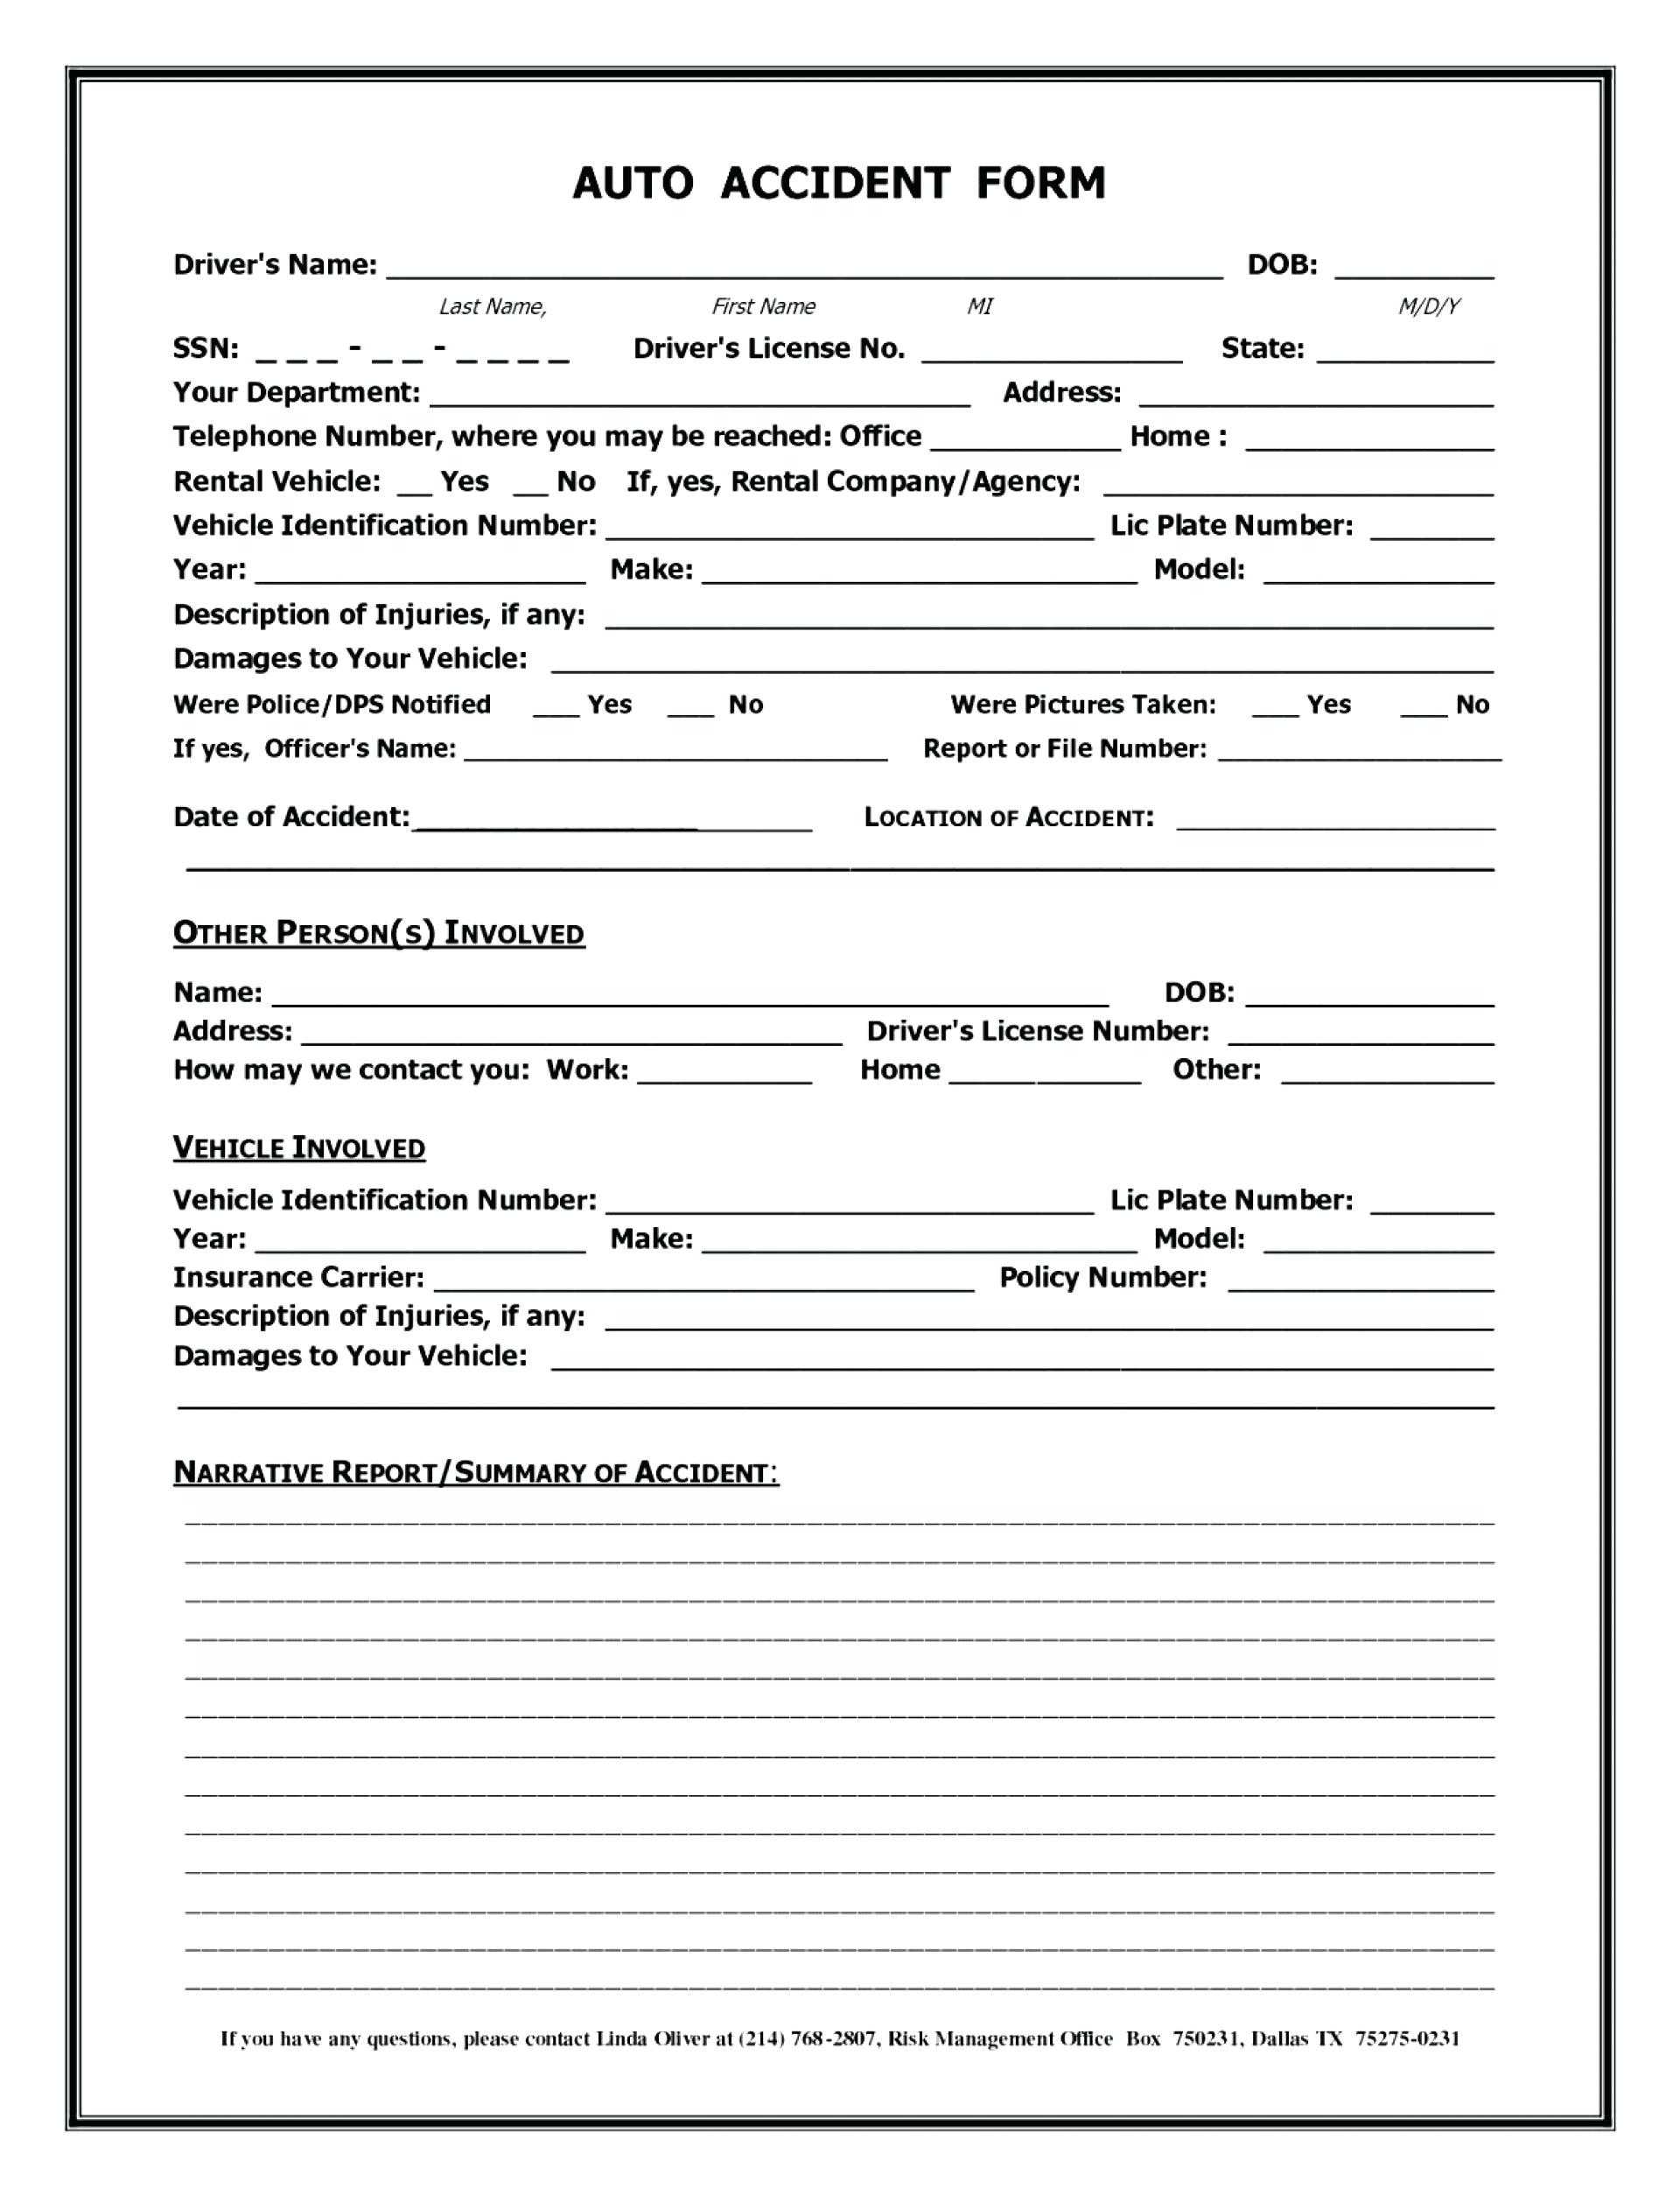 Accident Record Book Template – Tophatsheet.co For Vehicle Accident Report Form Template